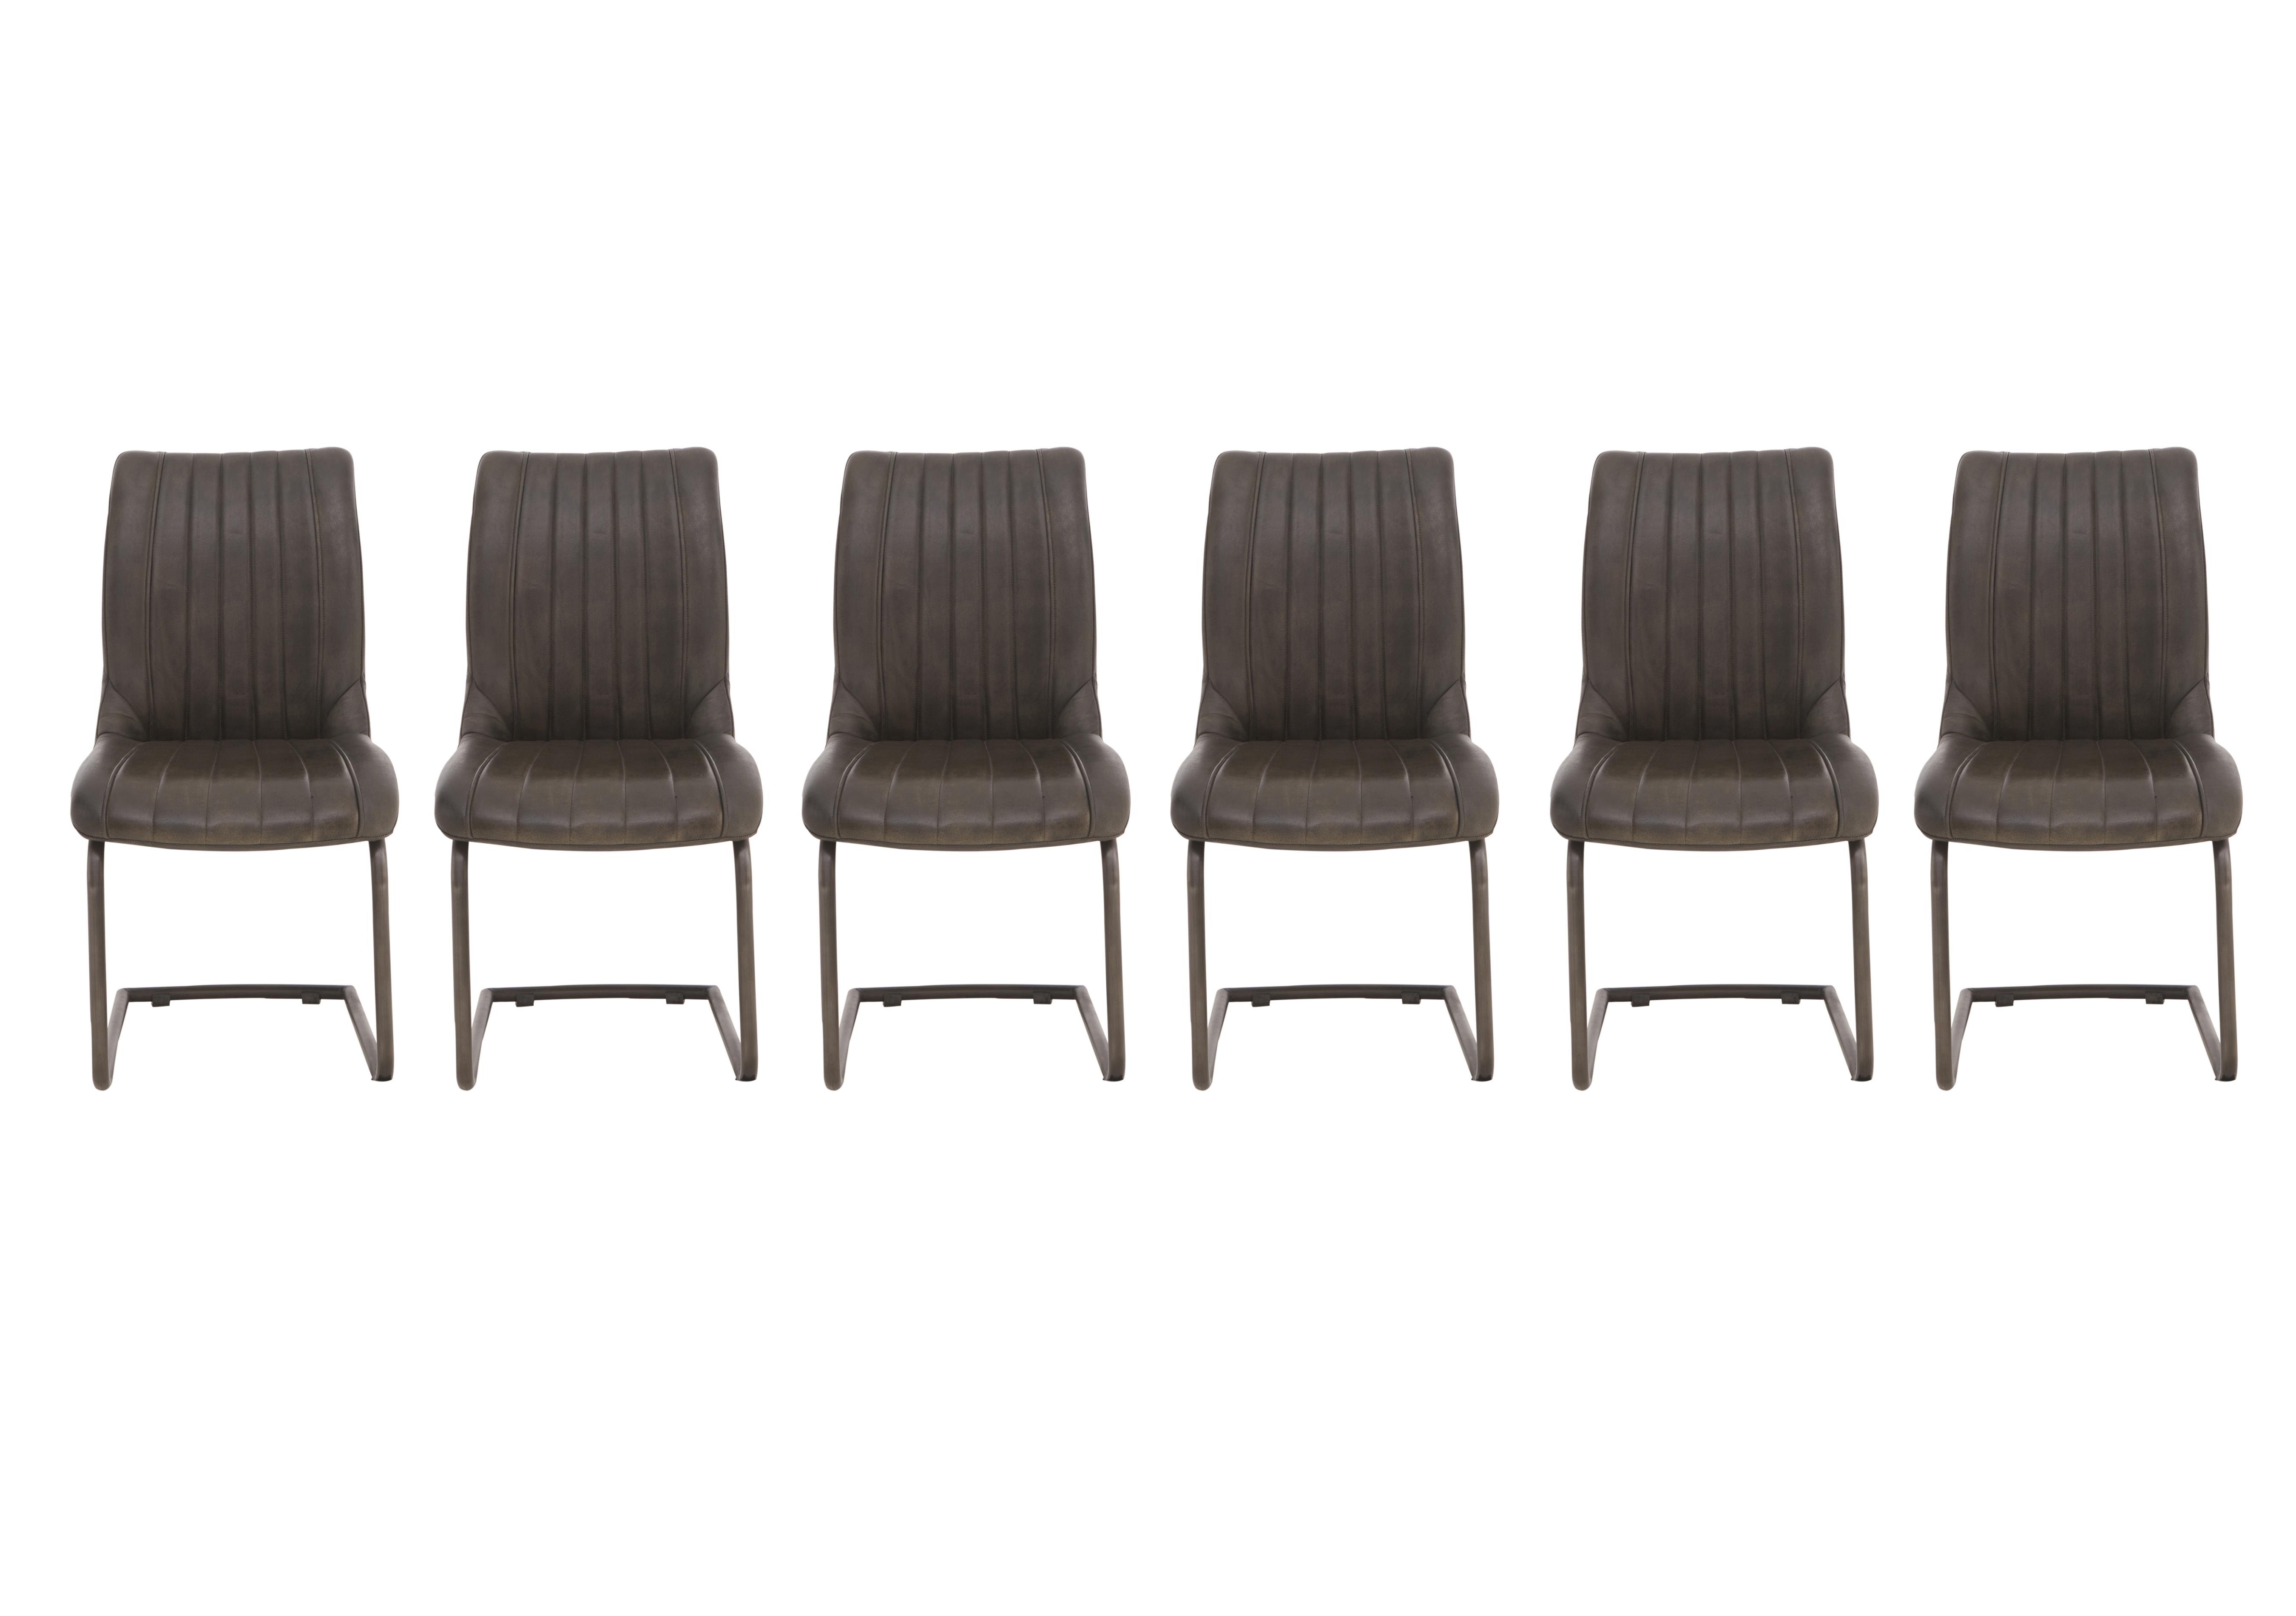 Dee Set of 6 Cantilever Leather Dining Chairs in Vintage Dark Grey on Furniture Village